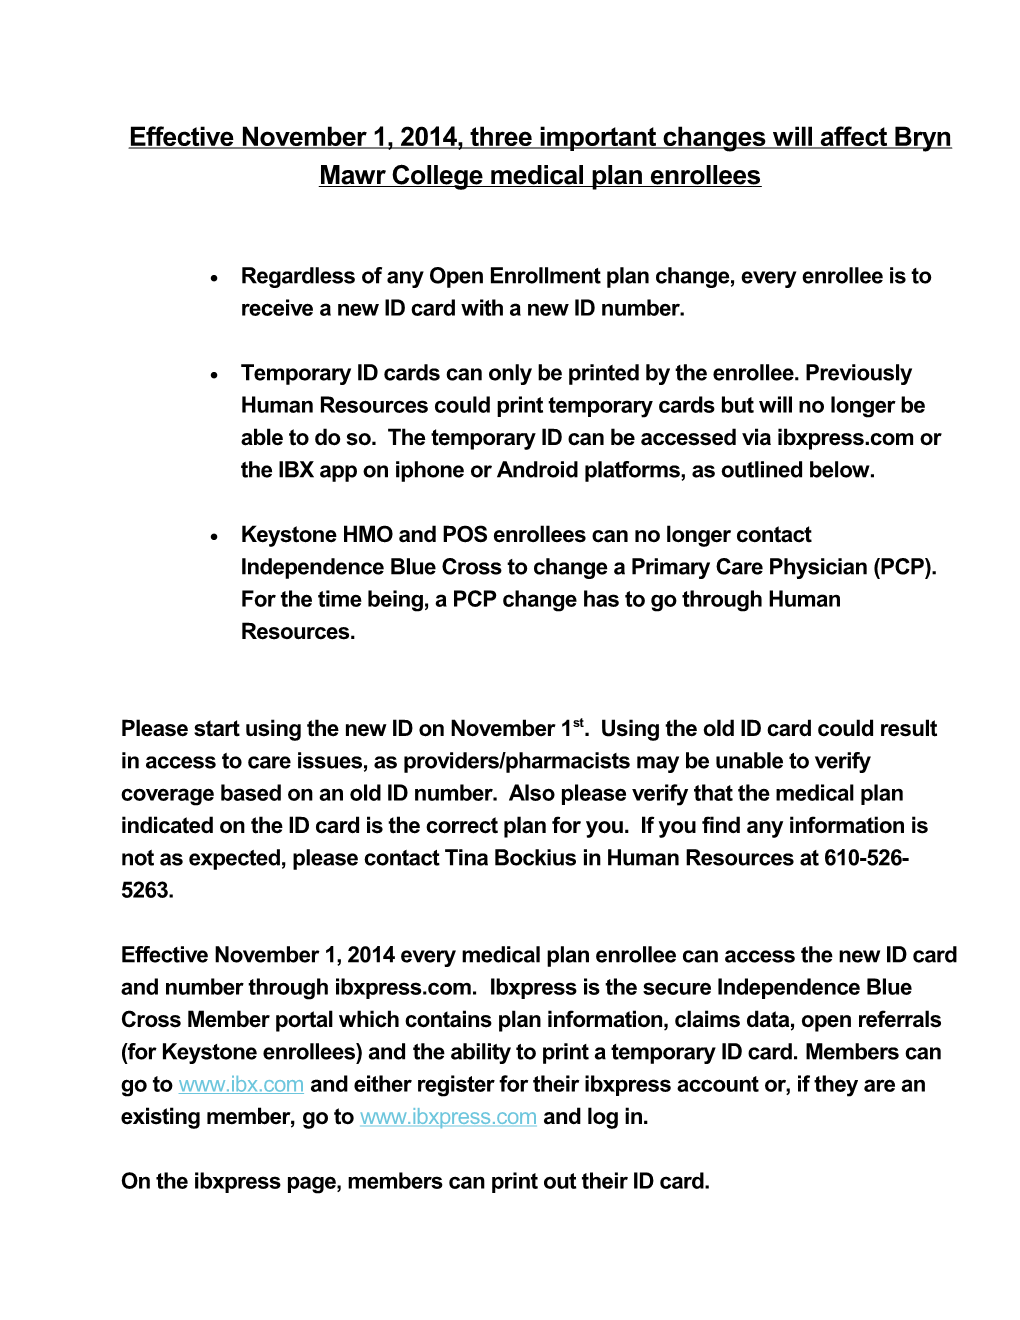 Effective November 1, 2014, Three Important Changes Will Affect Bryn Mawrcollege Medical